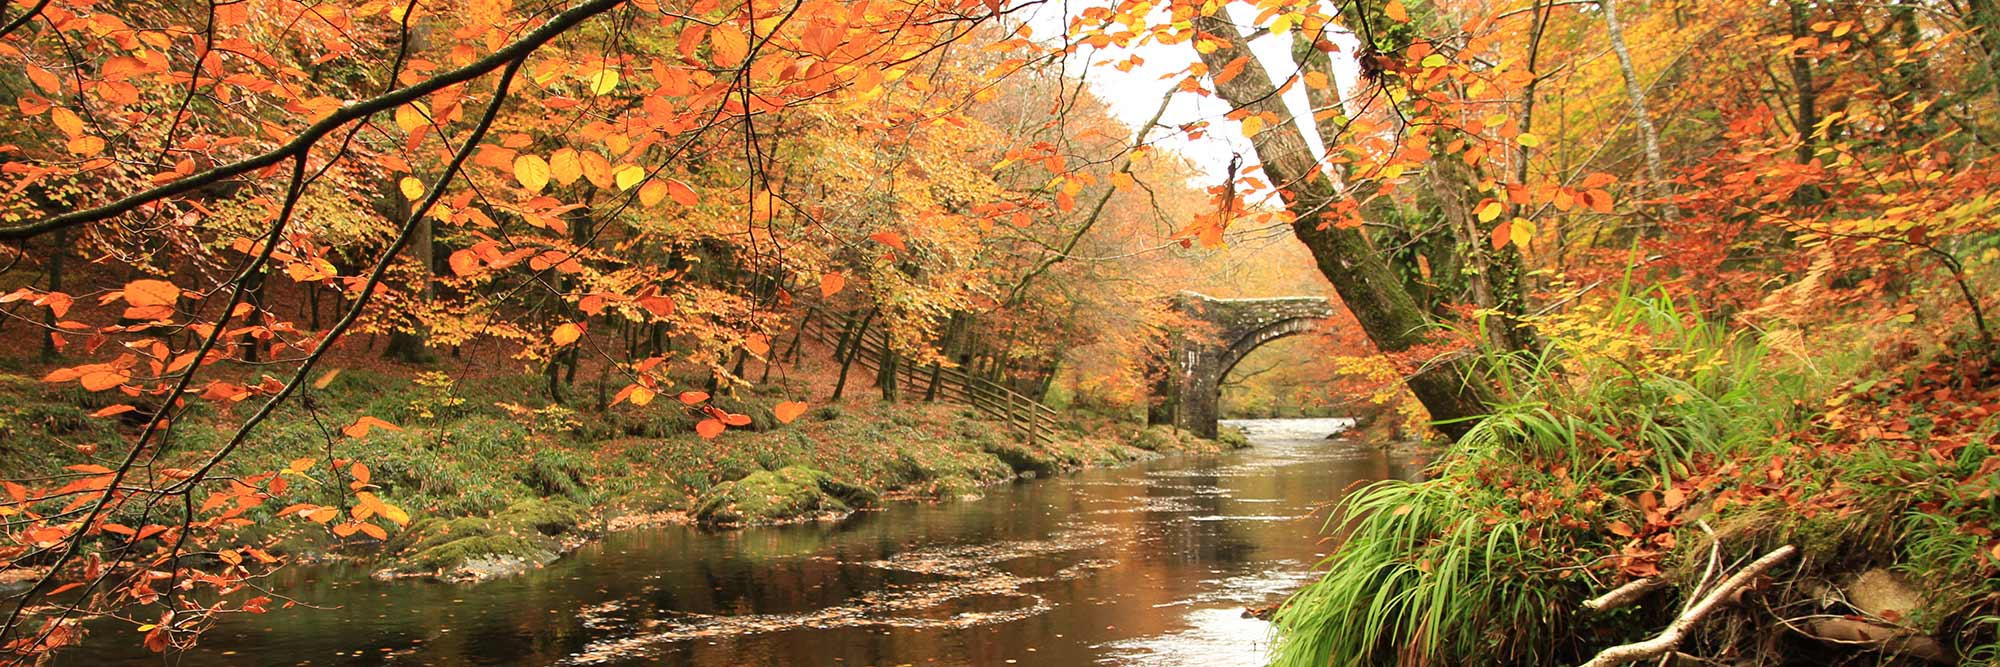 Orange leaves on beech trees overhanging a woodland river with a stone bridge in the distance